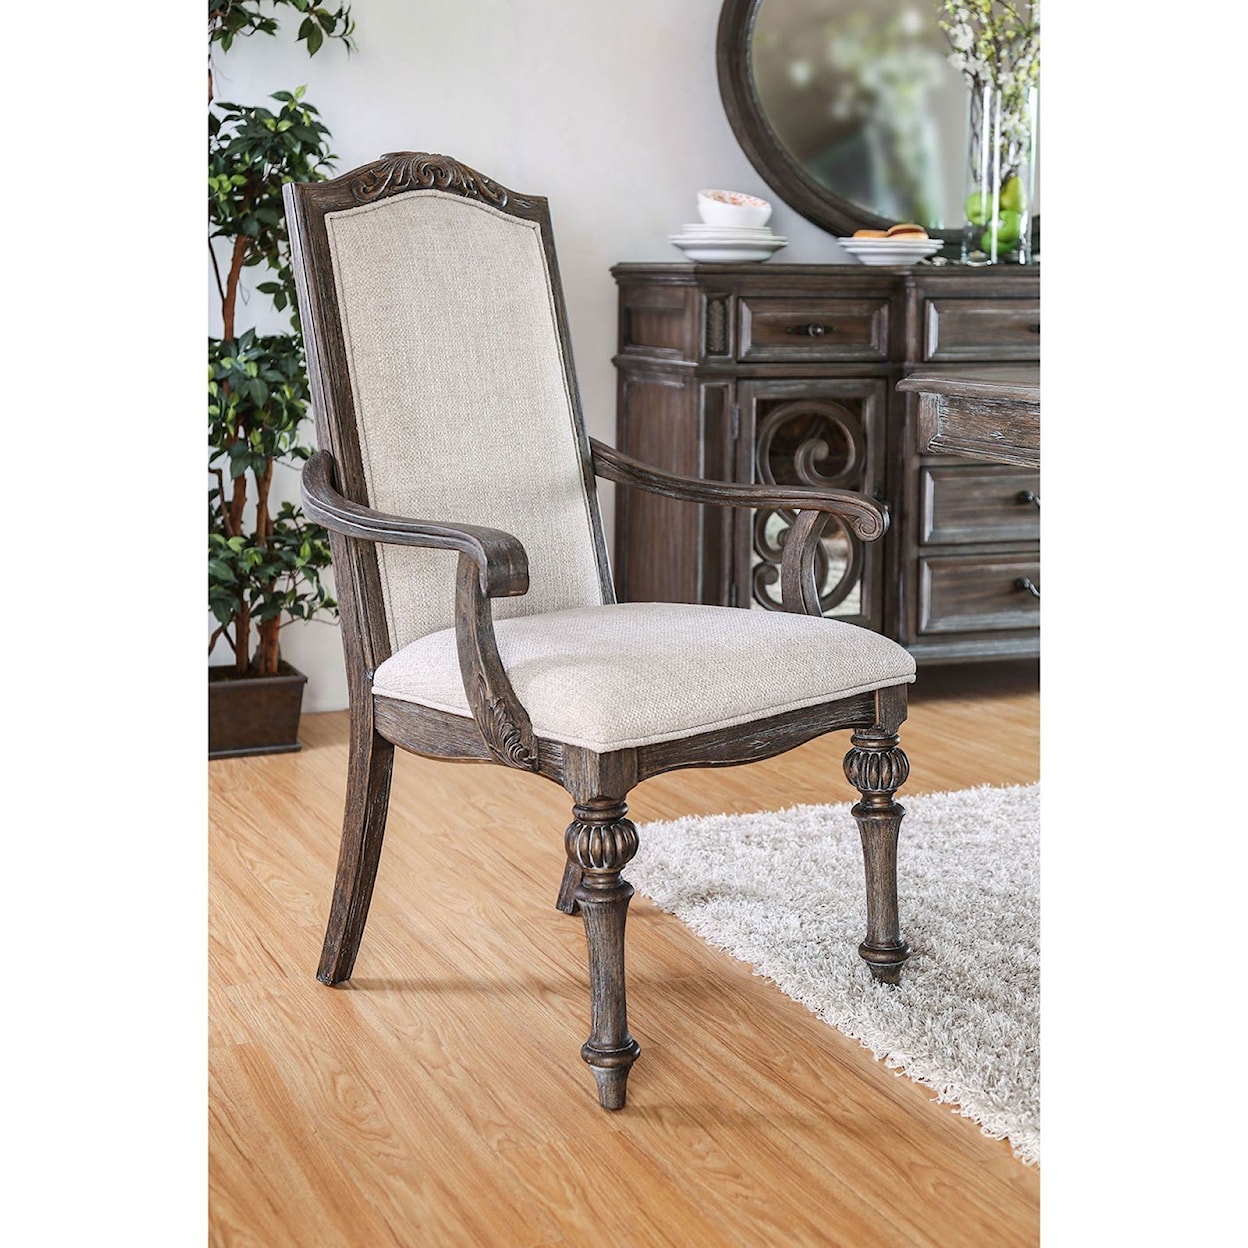 Furniture of America Arcadia Set of 2 Arm Chairs